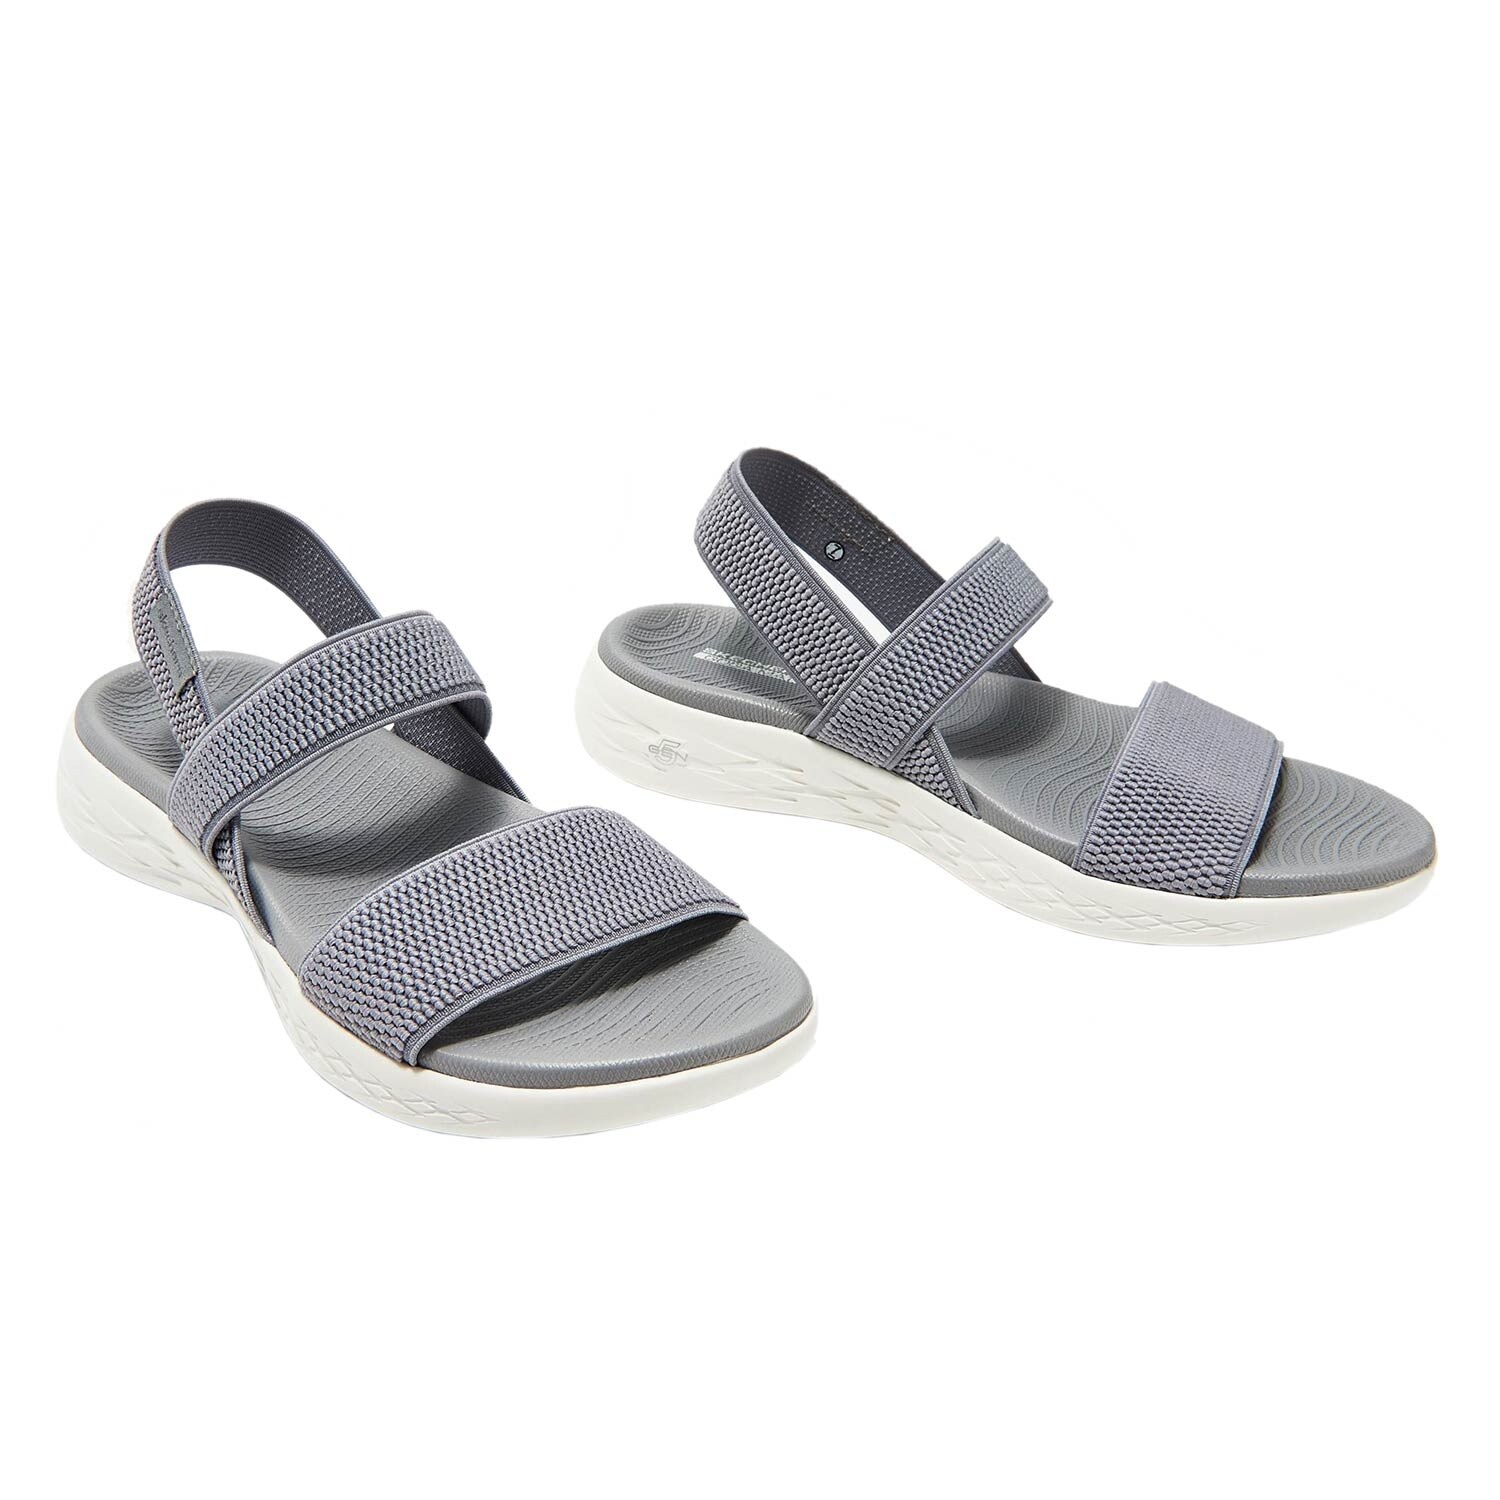 skechers on the go gore back strap sandals